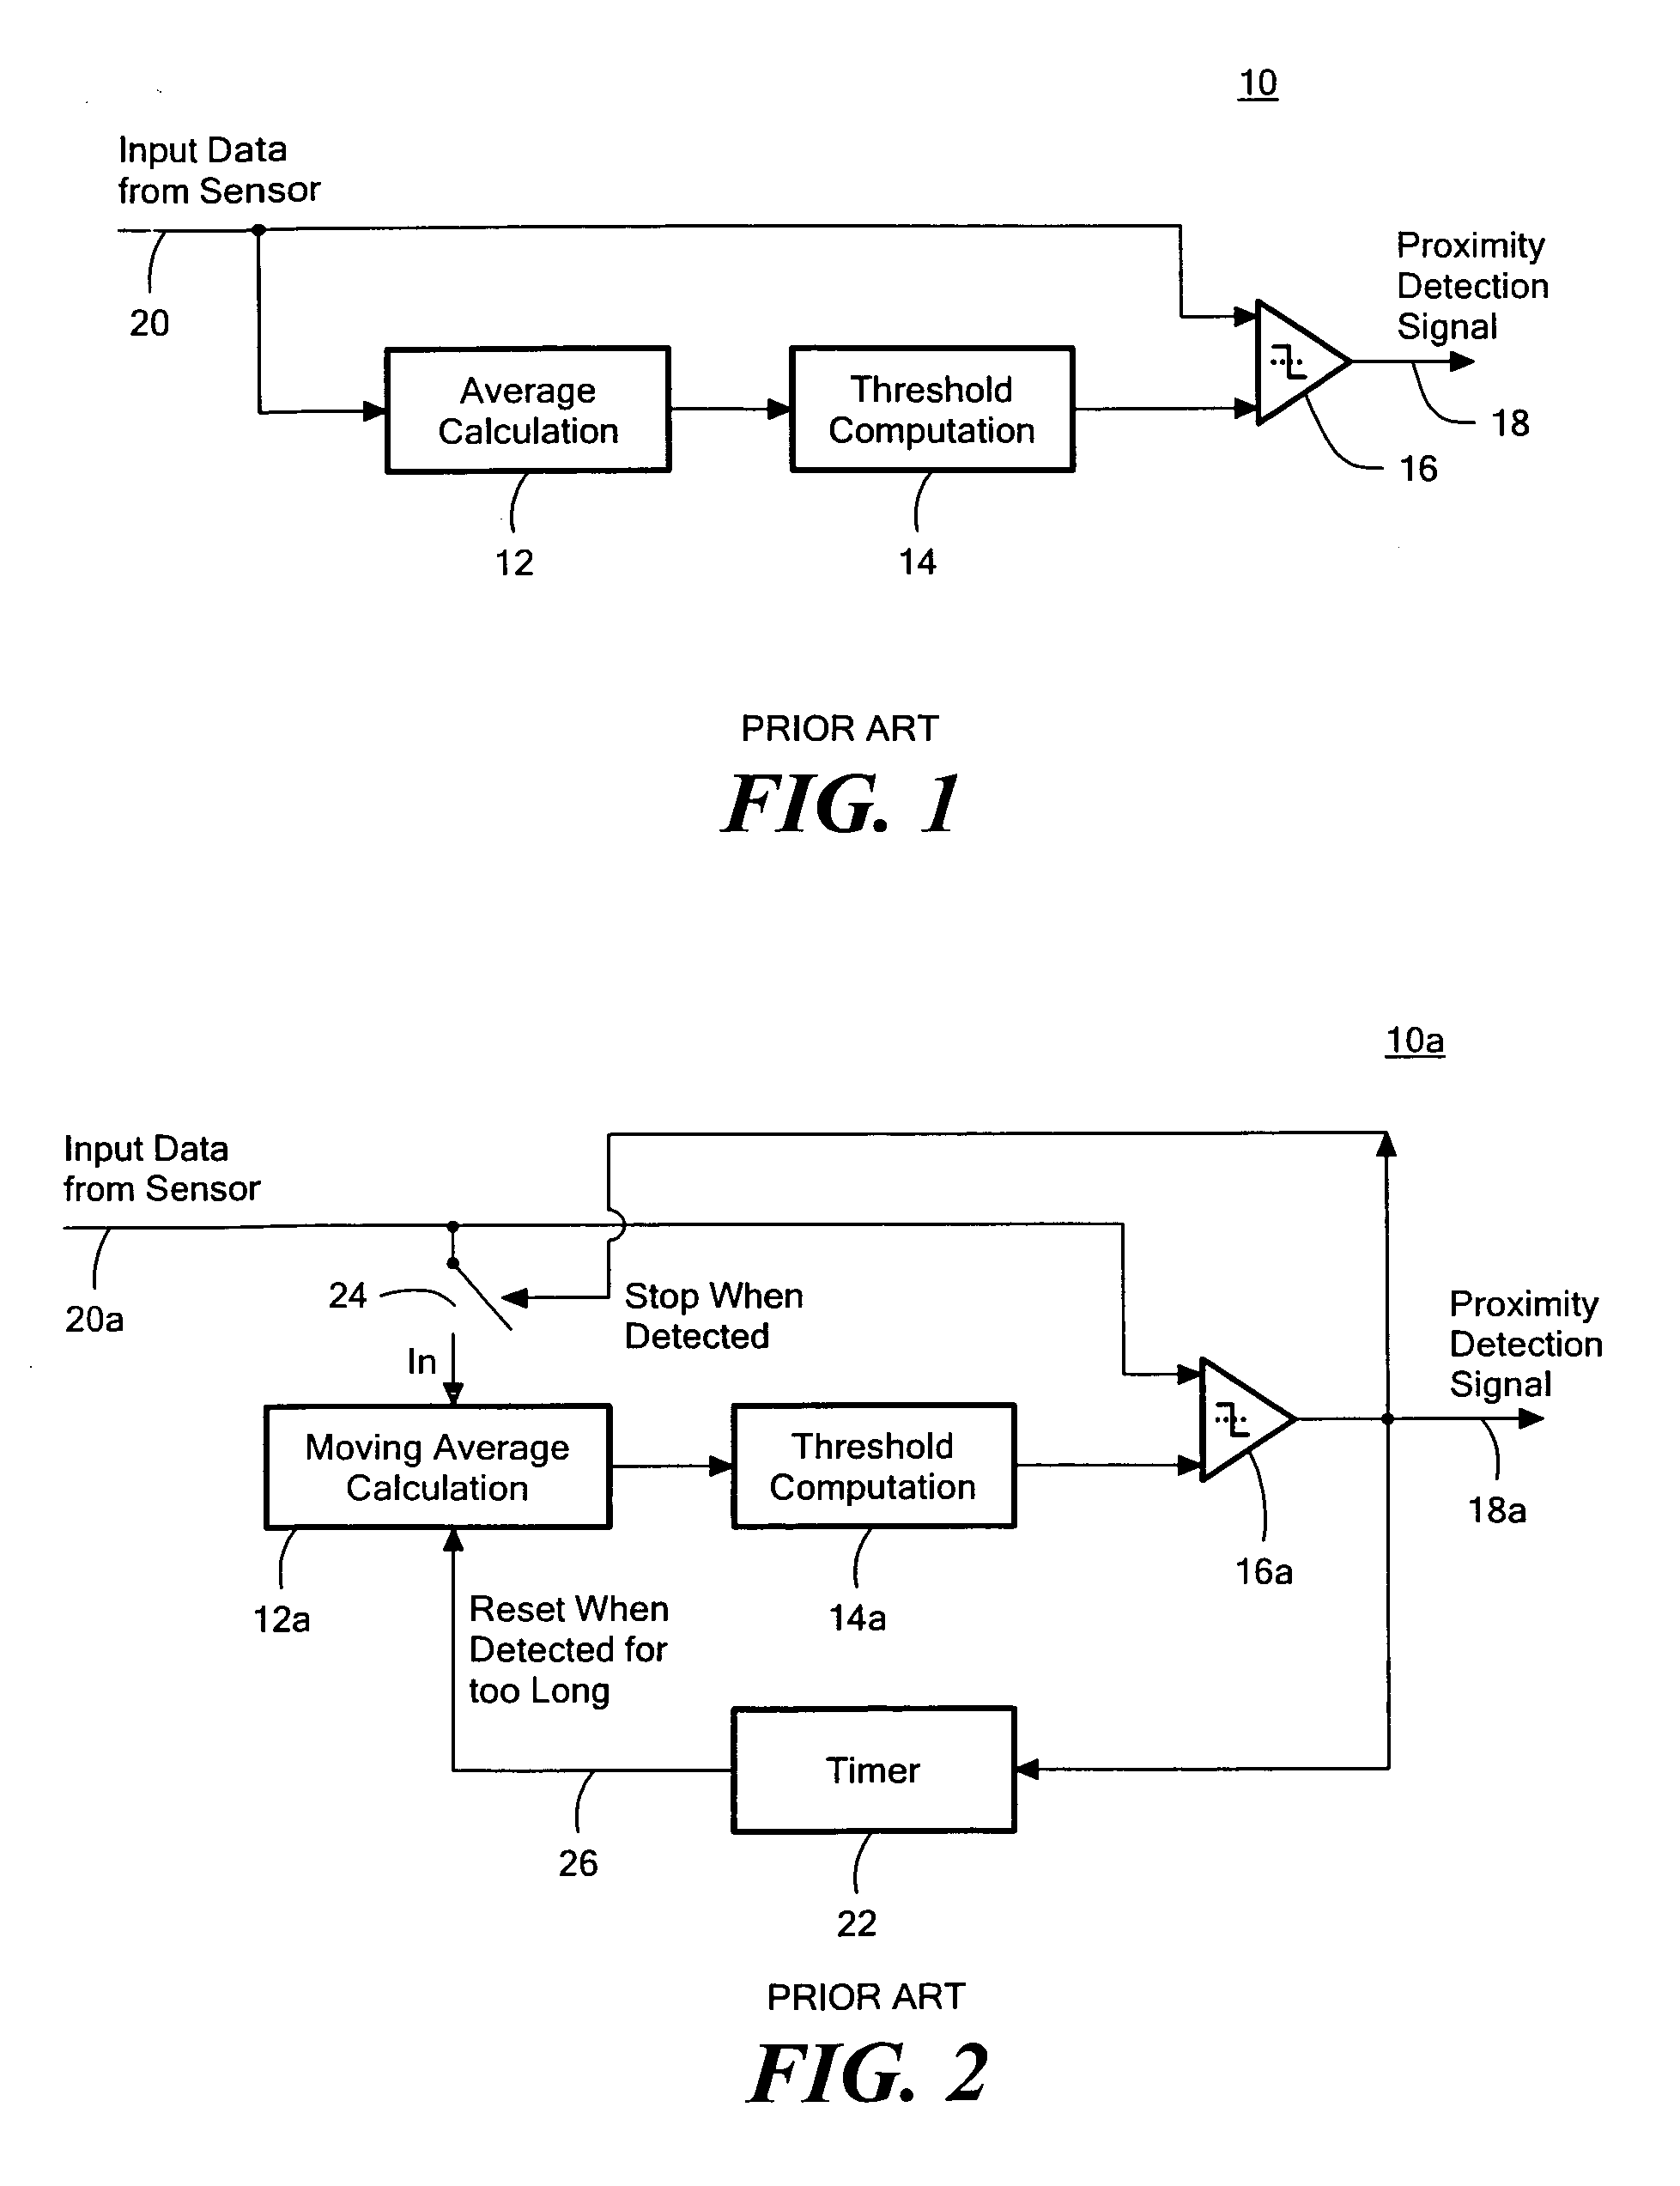 Proximity detection system and method